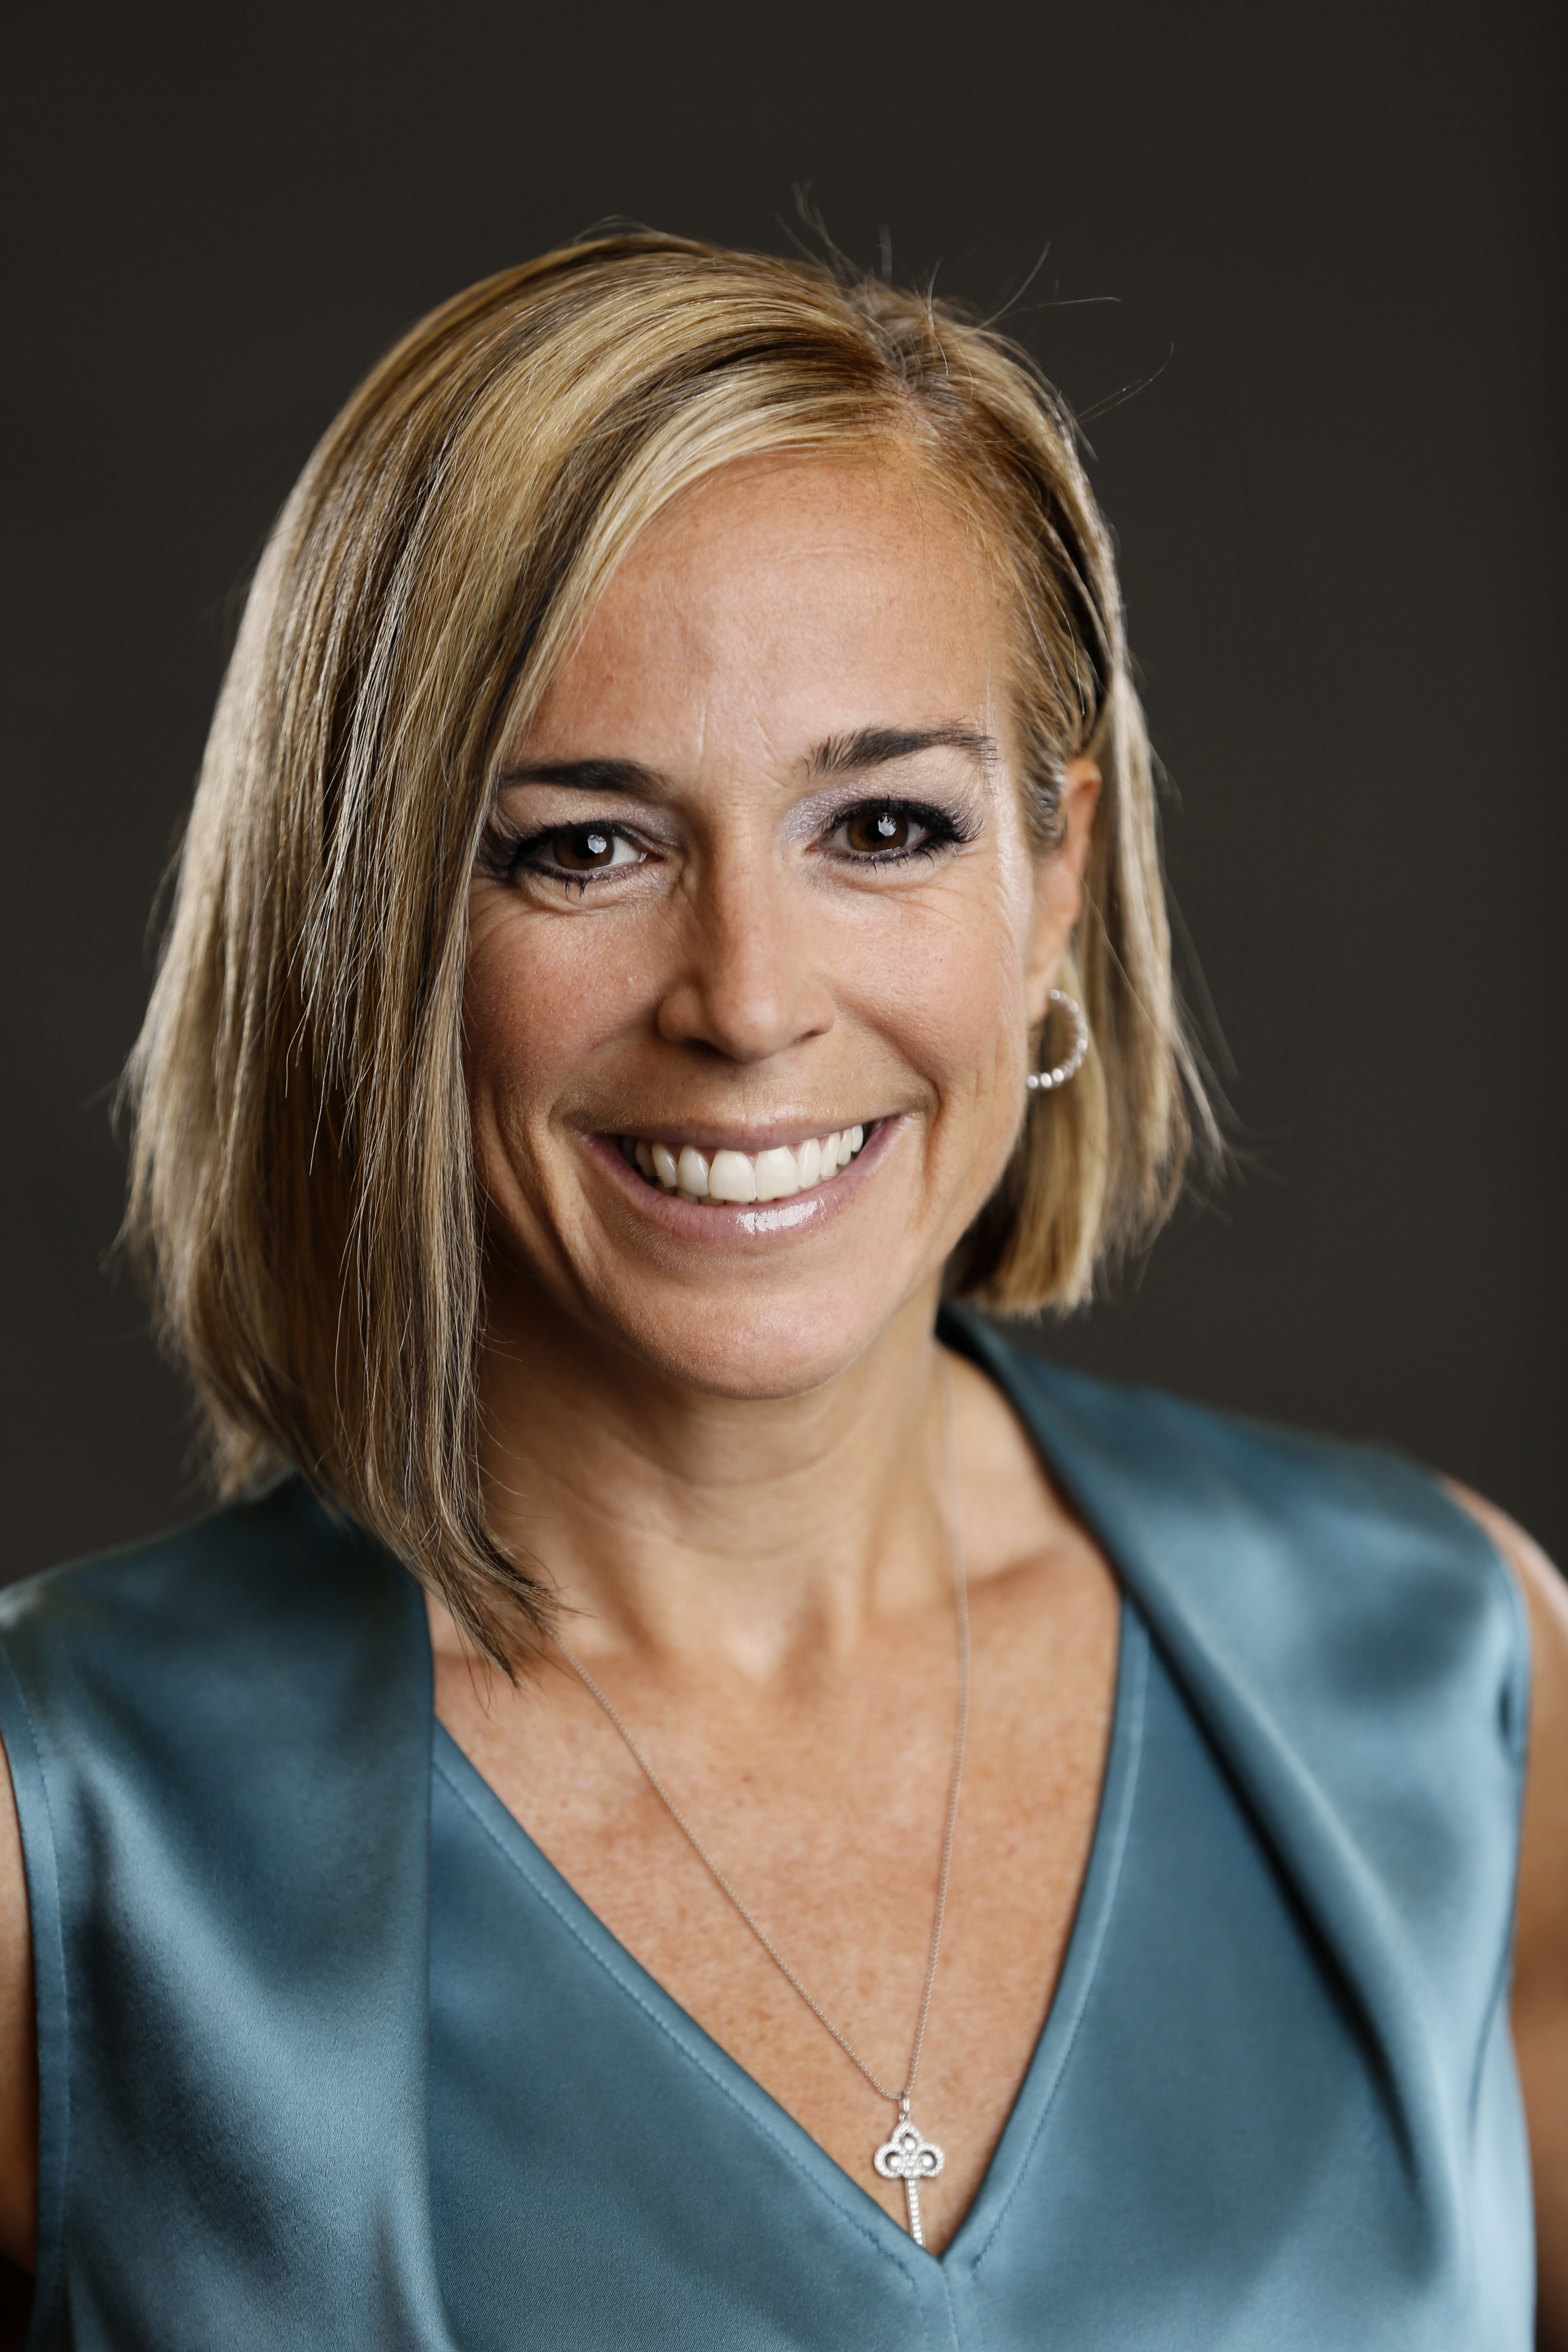 Sarah Nesland, General Manager of Retail, Transportation, and Logistics at Extreme Networks